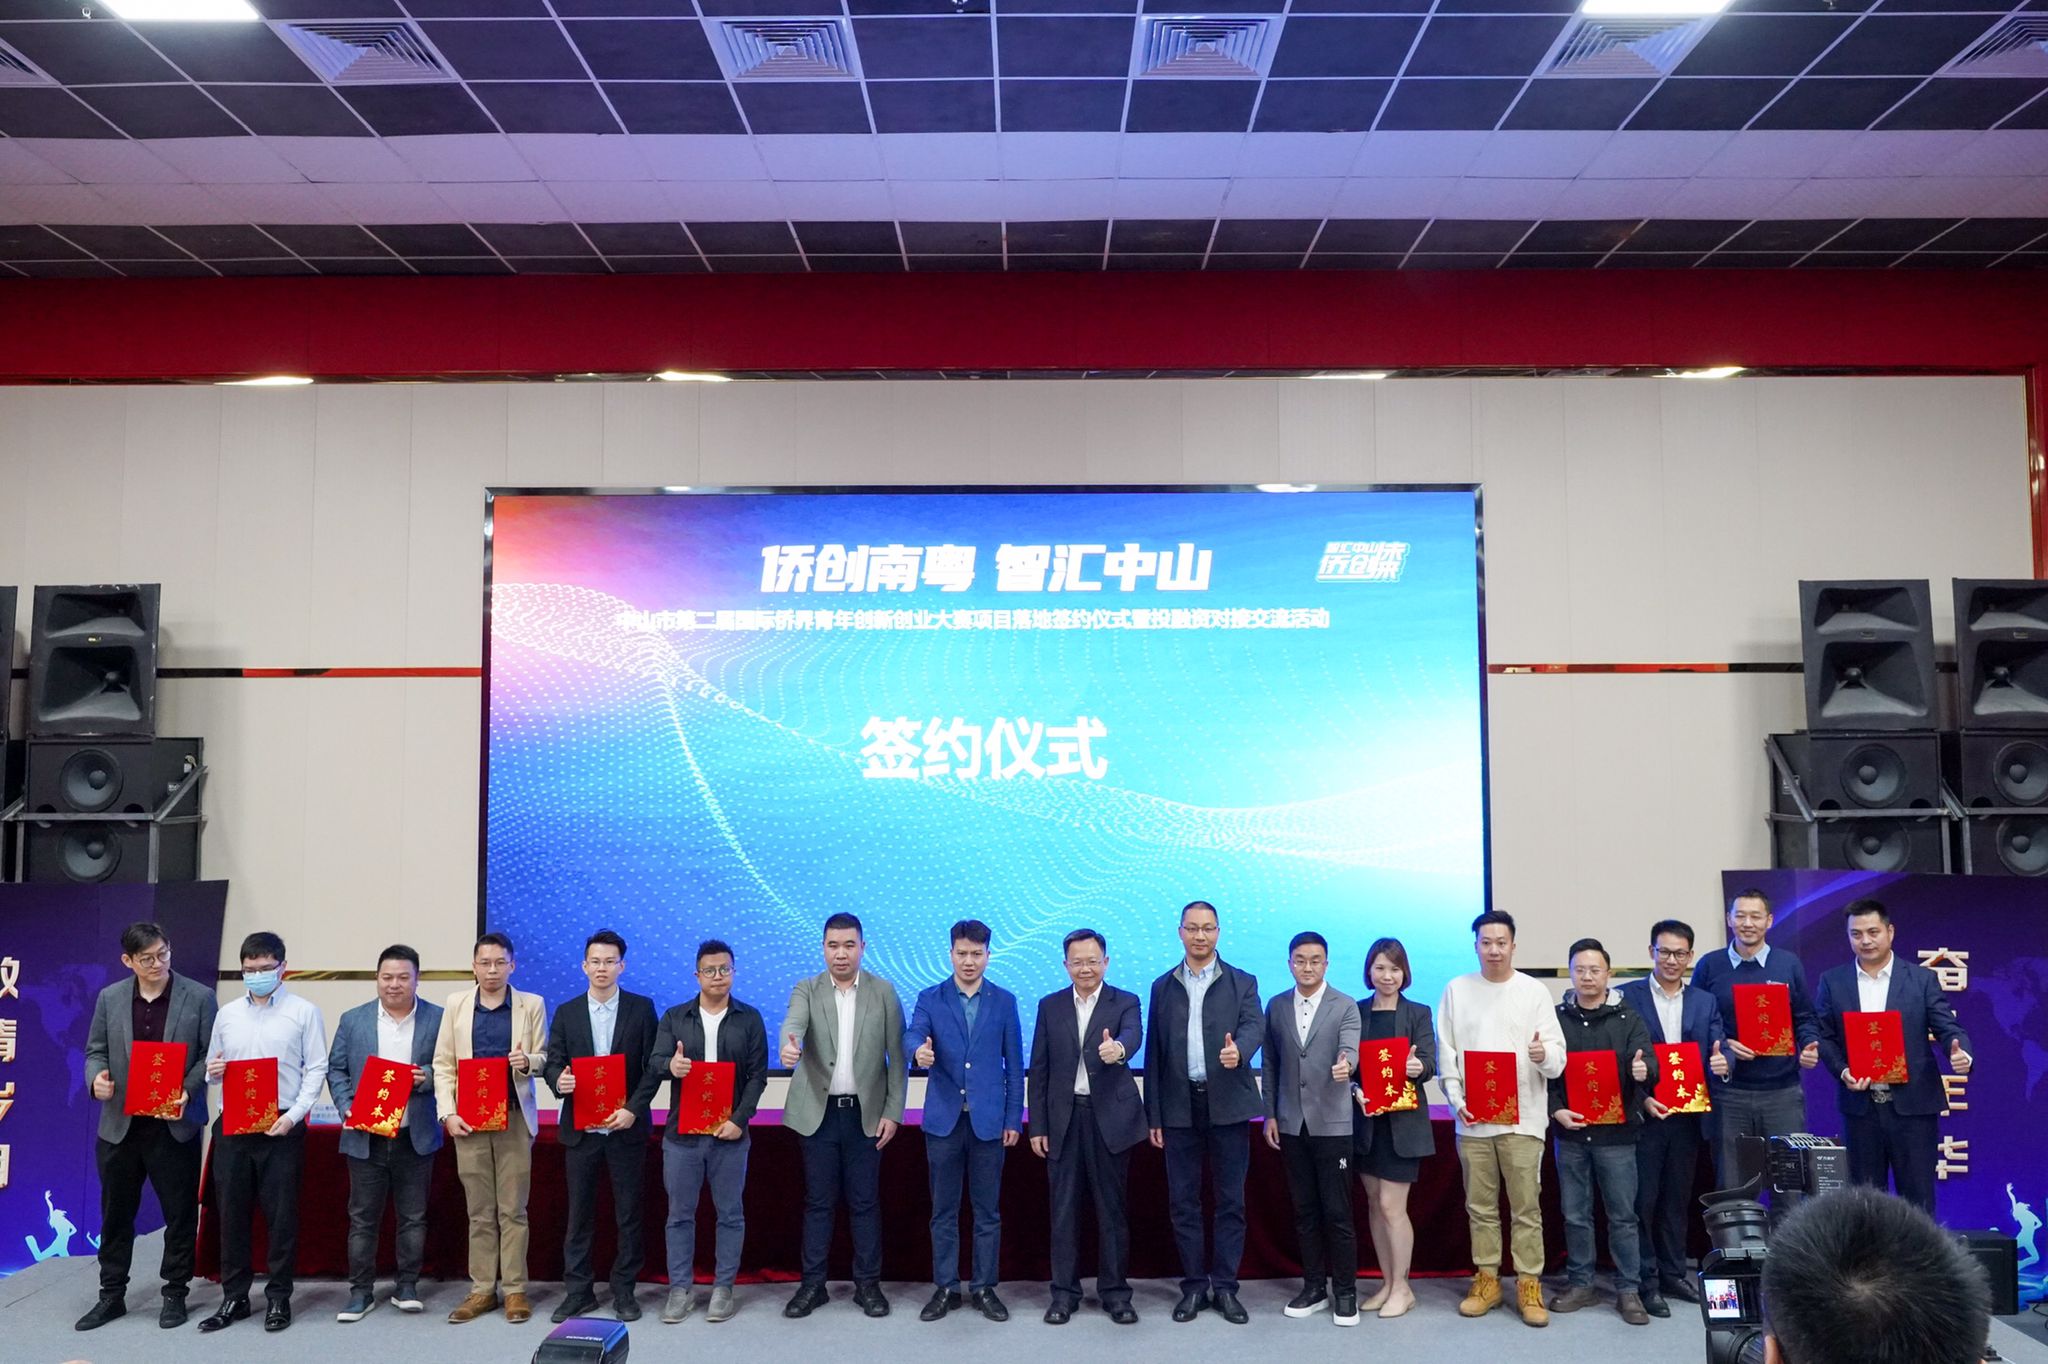 WhatsApp Image 2023-Mytheast received an award in the Zhongshan International Overseas Chinese Youth Innovation and Entrepreneurship Competition11-13 at 09.28.52.jpeg__PID:a5075afd-a238-48b7-a5f7-00a7bf2be98a